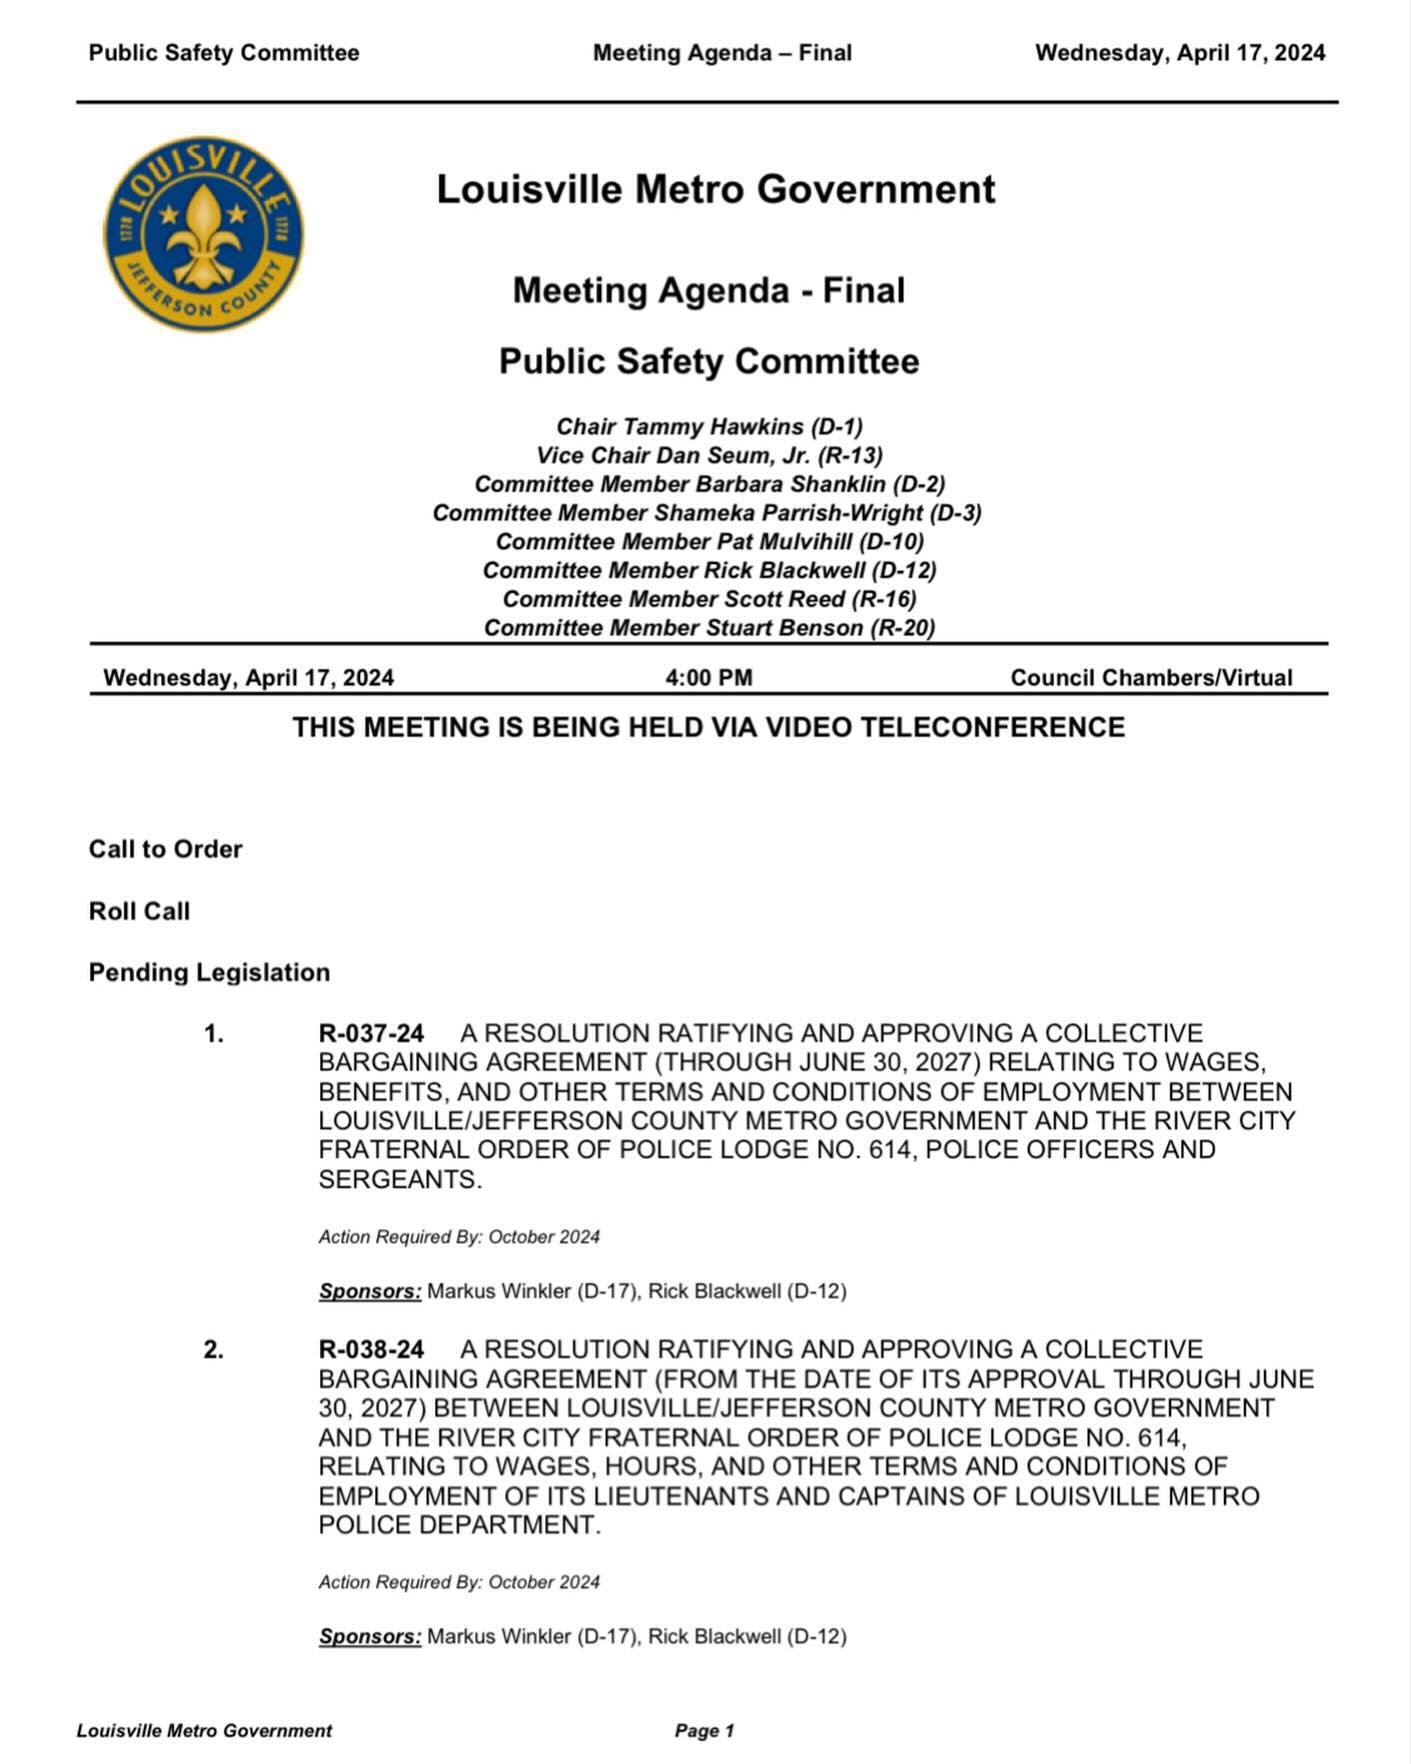 TODAY at 4 p.m. the Metro Council Public Safety Committee will take up the proposed collective bargaining agreements with the police union. Easy ways to watch: Louisville Metro Council&rsquo;s Facebook page or @LouisvilleMetroTV on YouTube.